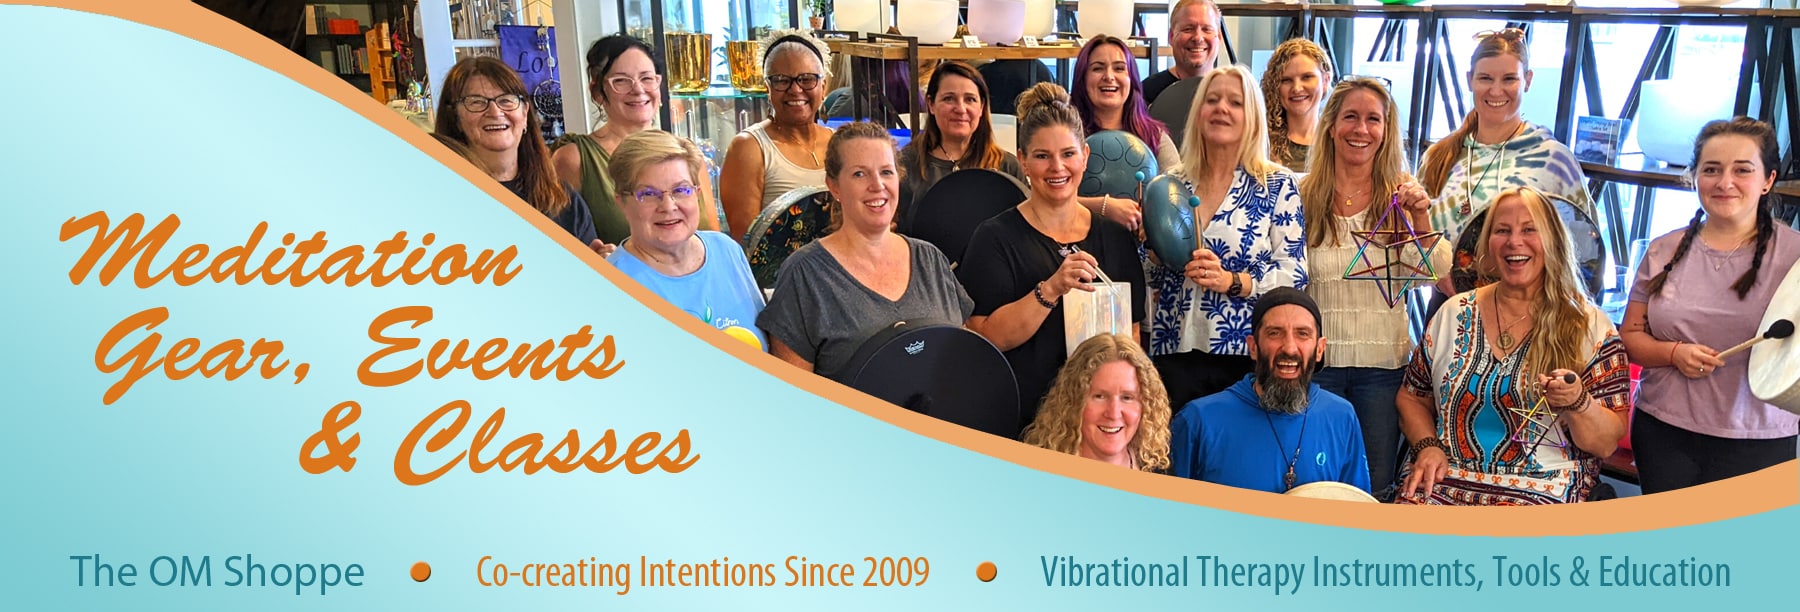 The OM Shoppe meditation gear, events and classes